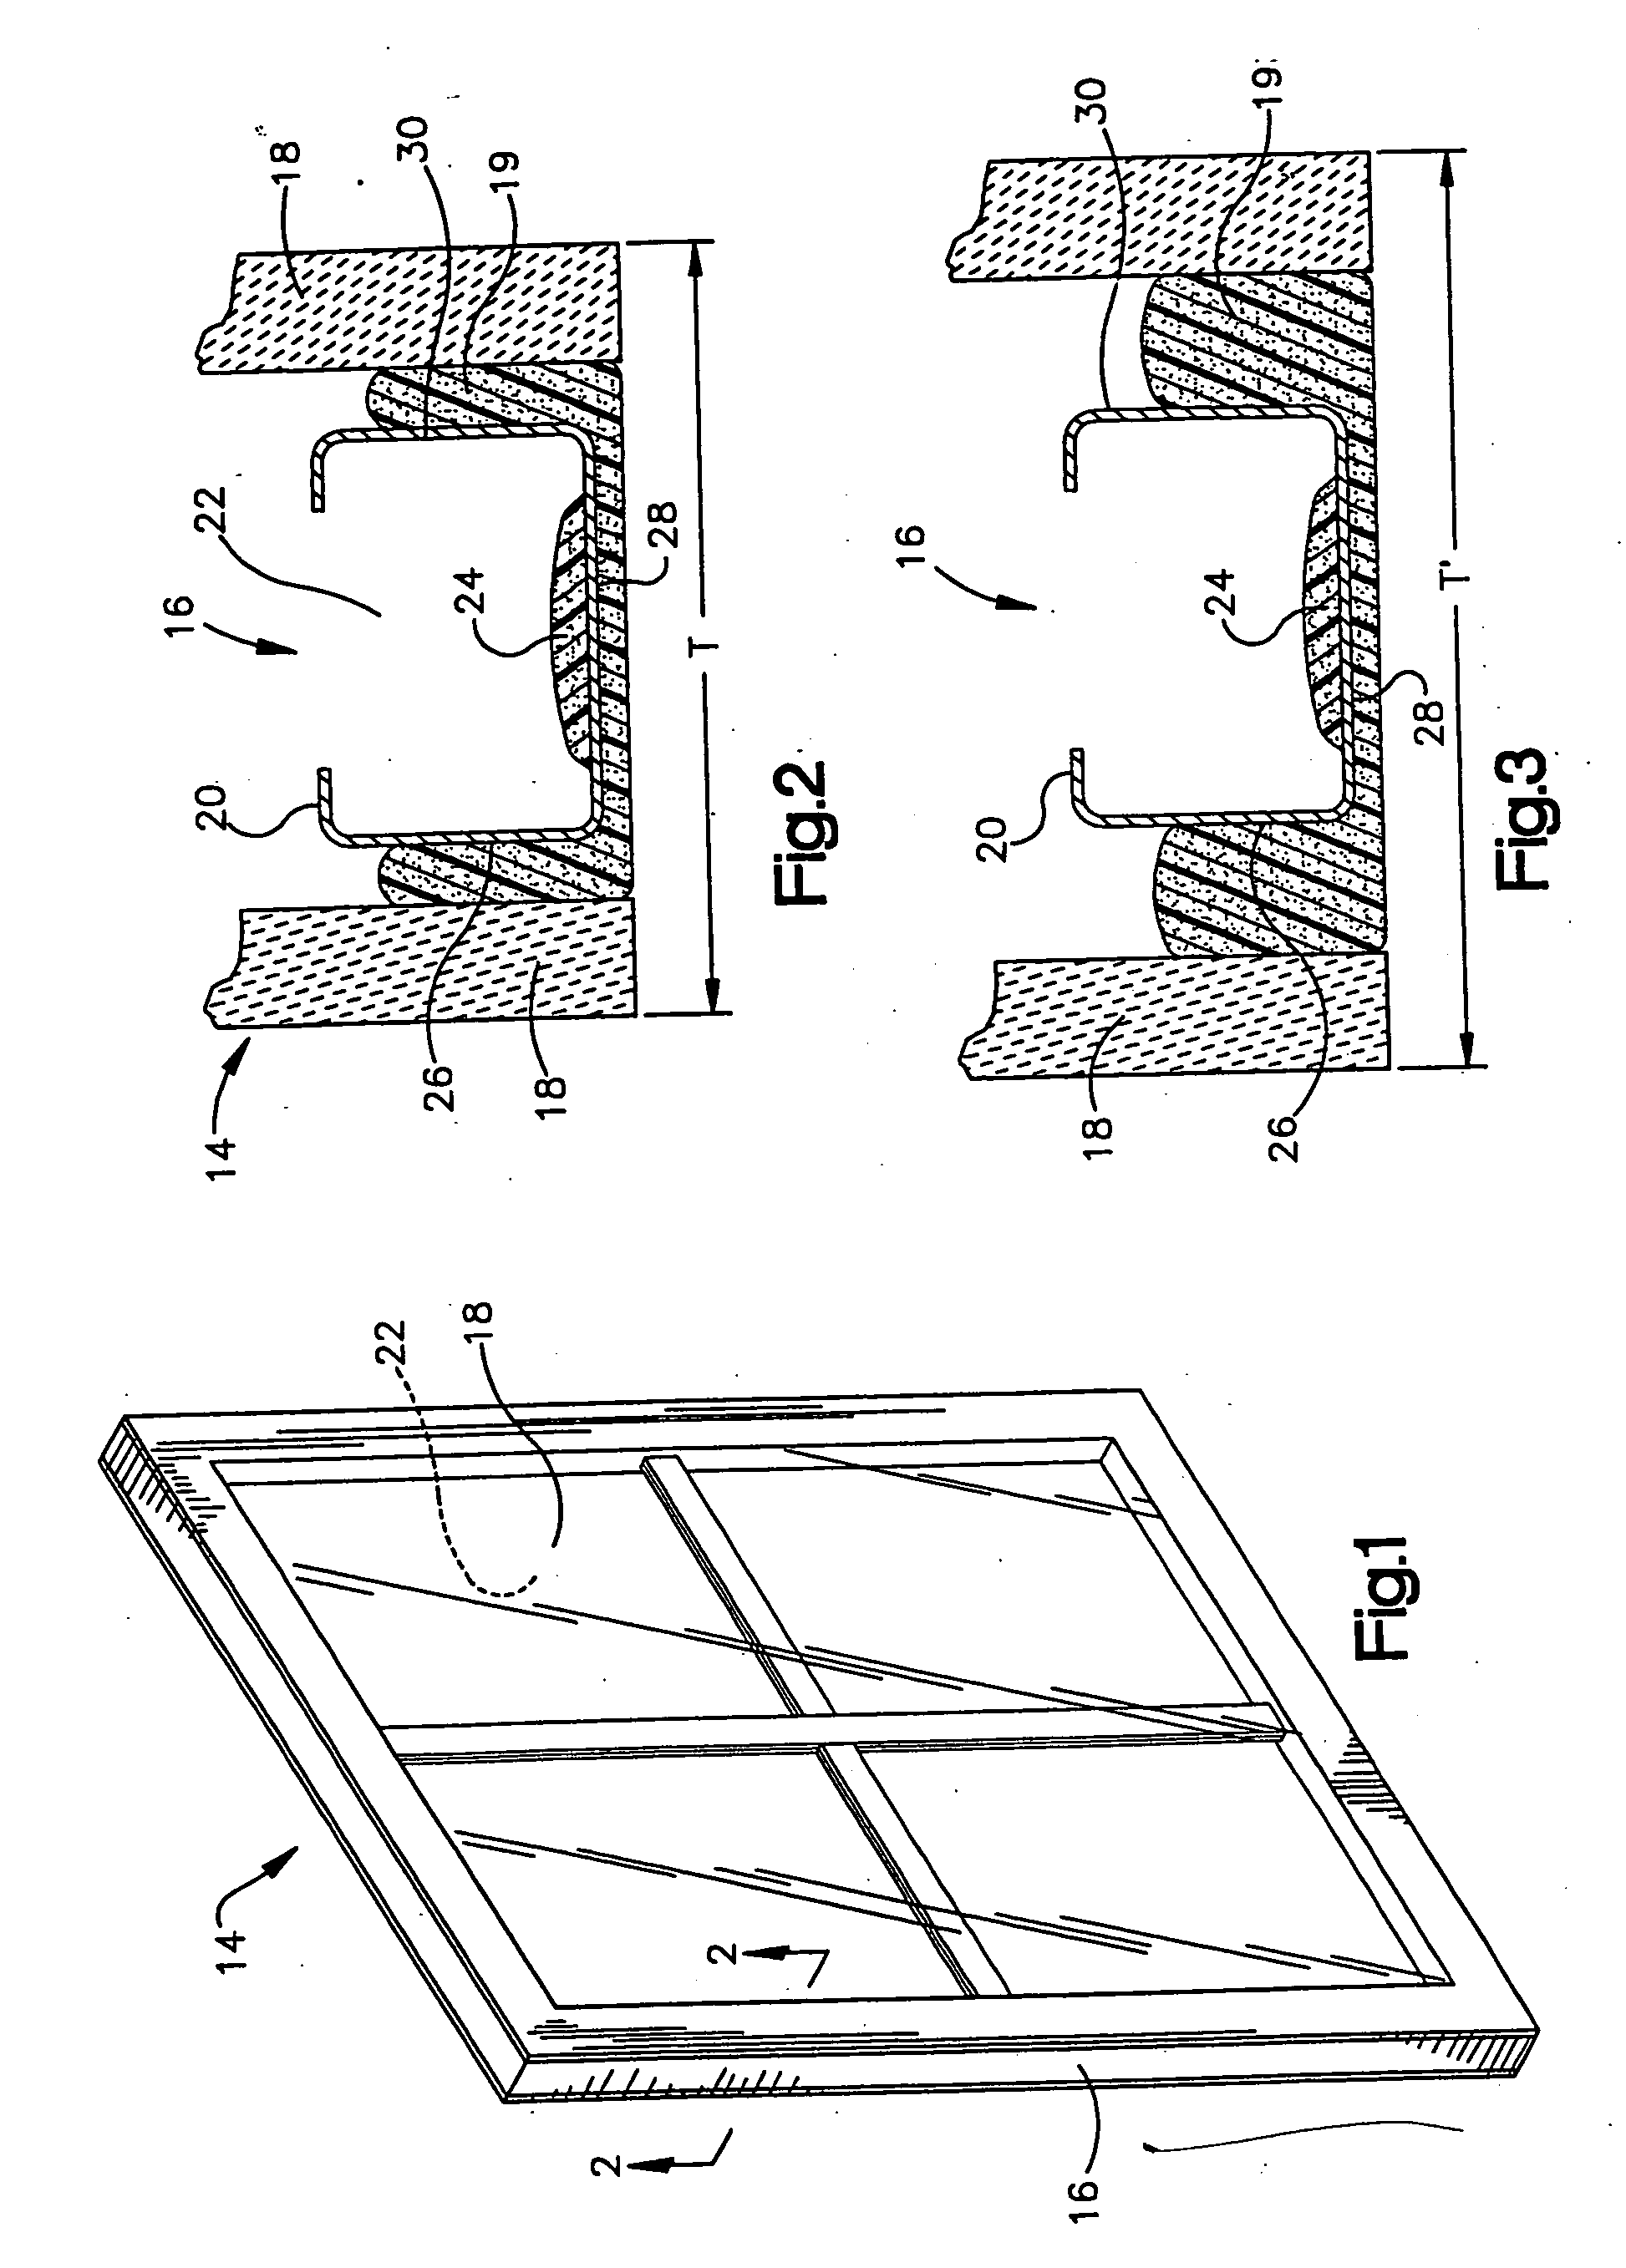 Method for processing sealant of an insulating glass unit